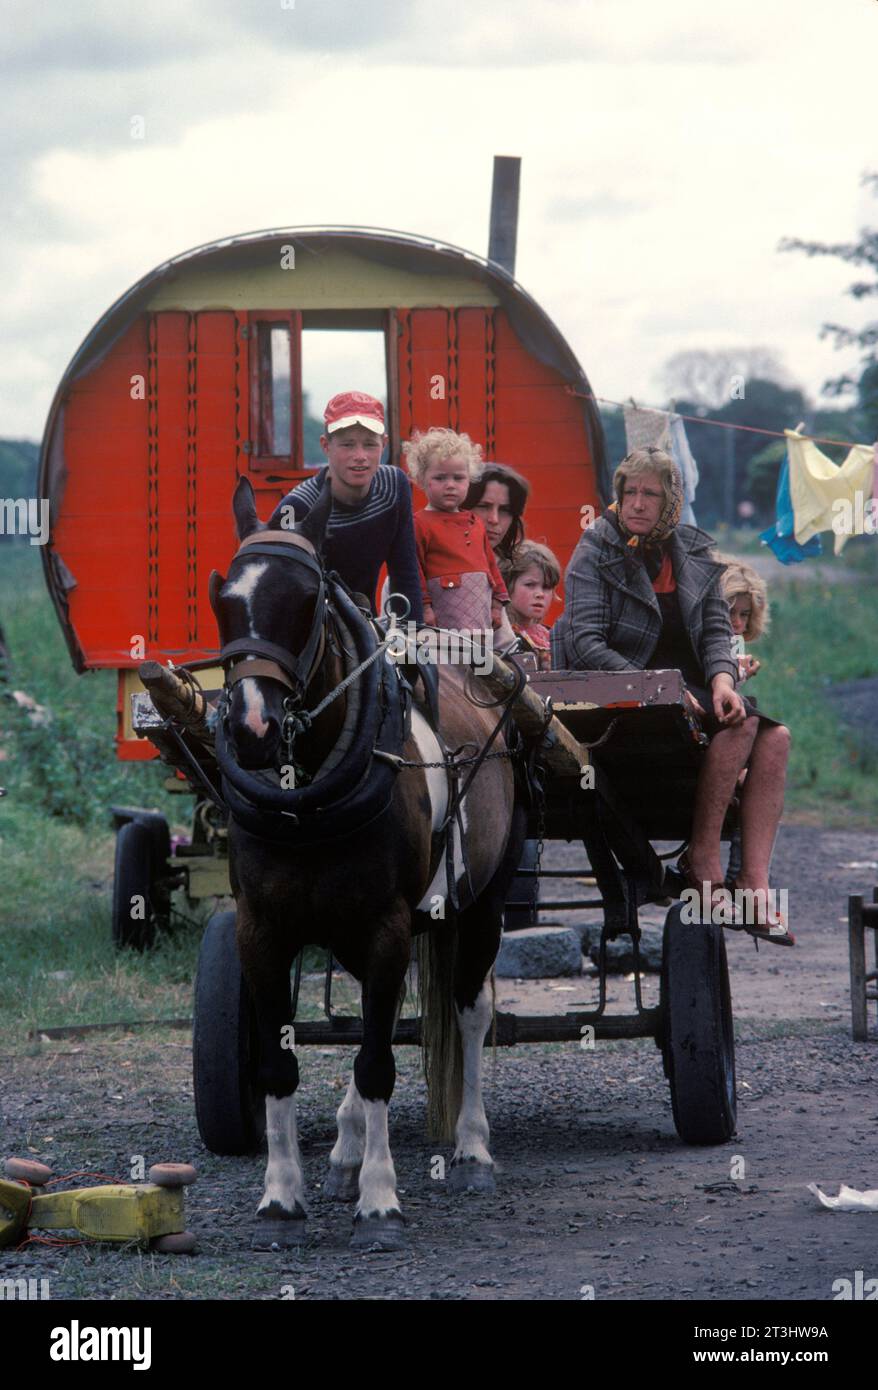 Irish travellers family group. Grandmother, mother, and children. They are pitched at the side of the road. The wagon is a traditional wooden Bow or Barrel topped horse drawn wagon. Bunratty, County Clare, Eire 1979 1970s Southern Ireland HOMER SYKES Stock Photo